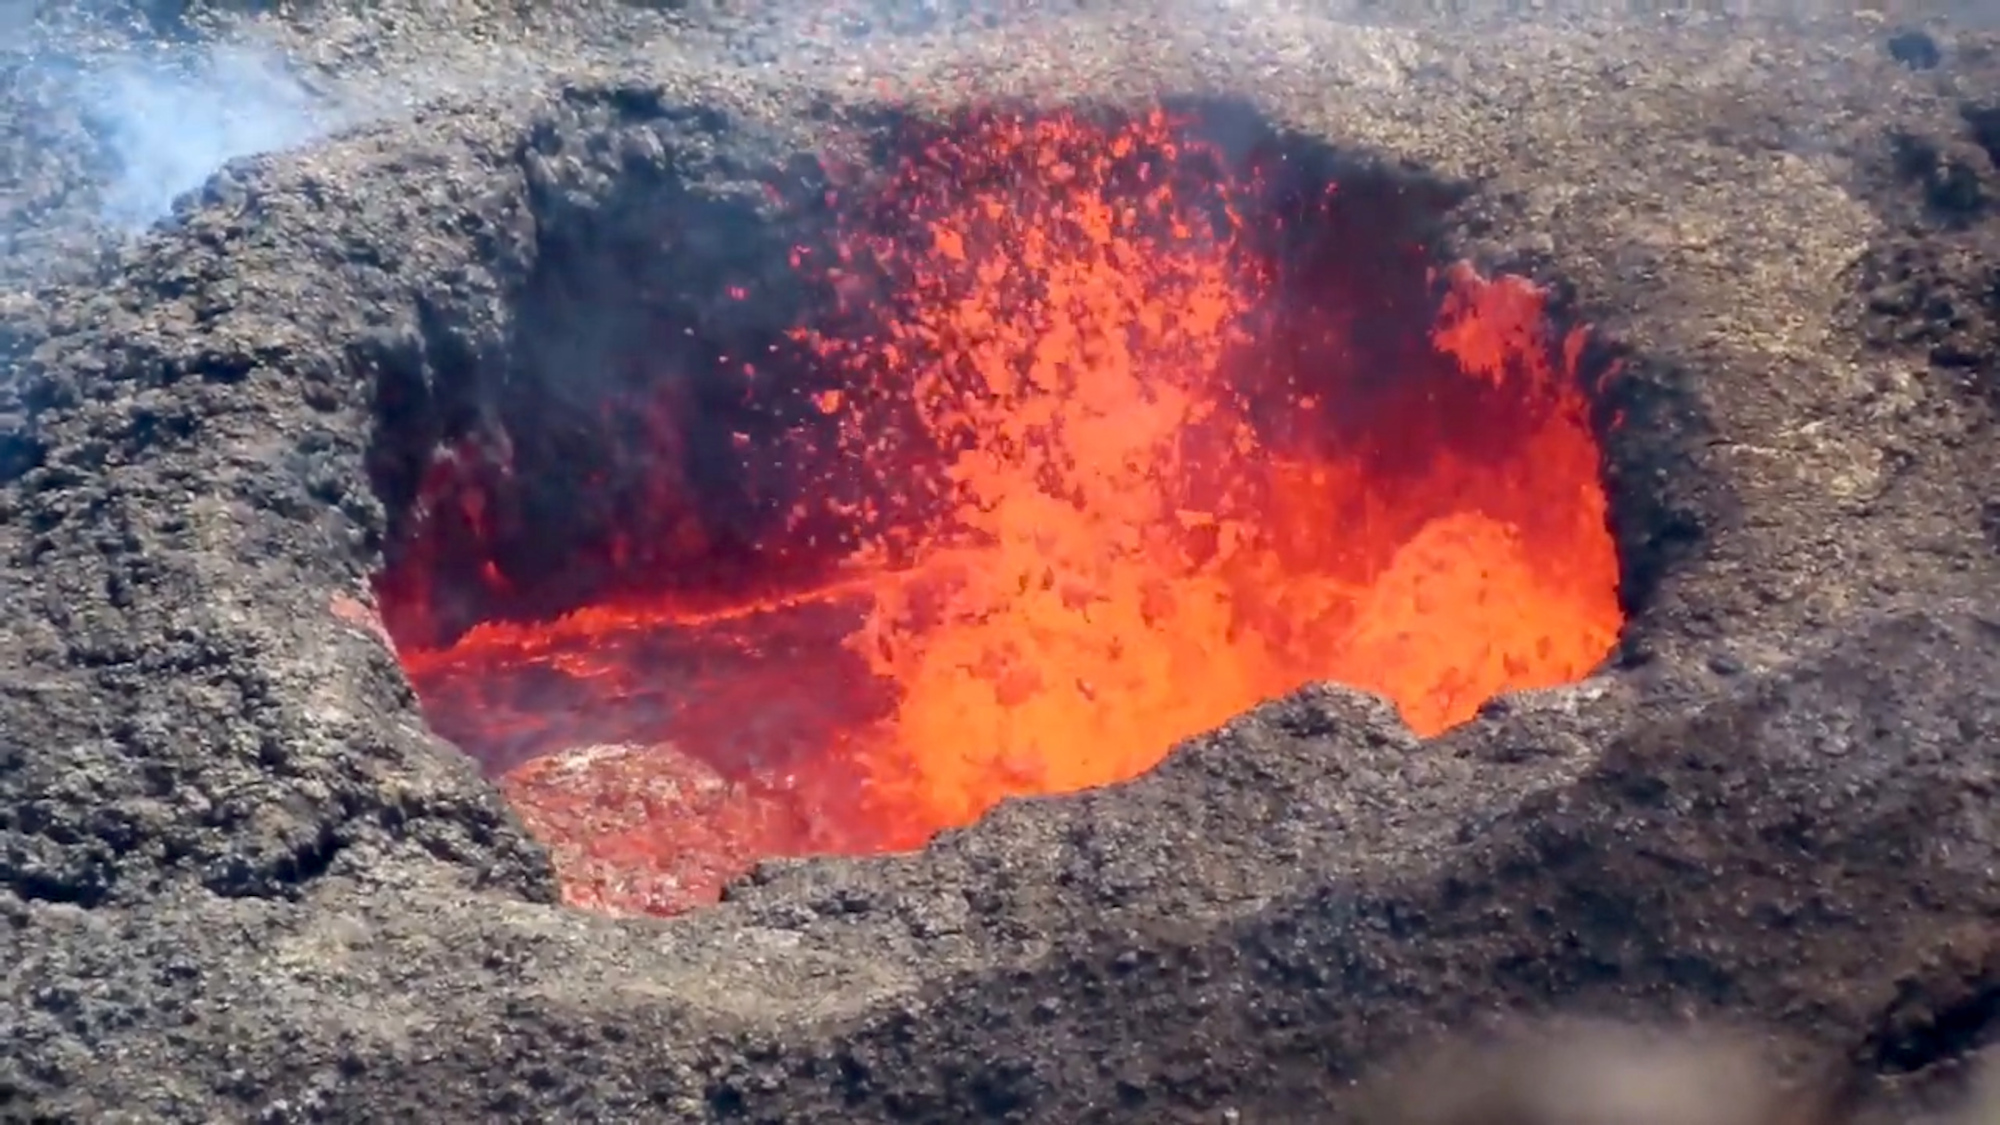 Lava sloshing and spattering in the west vent in Halema‘uma‘u crater at Kīlauea volcano. (U.S. Geological Survey/Zenger News)